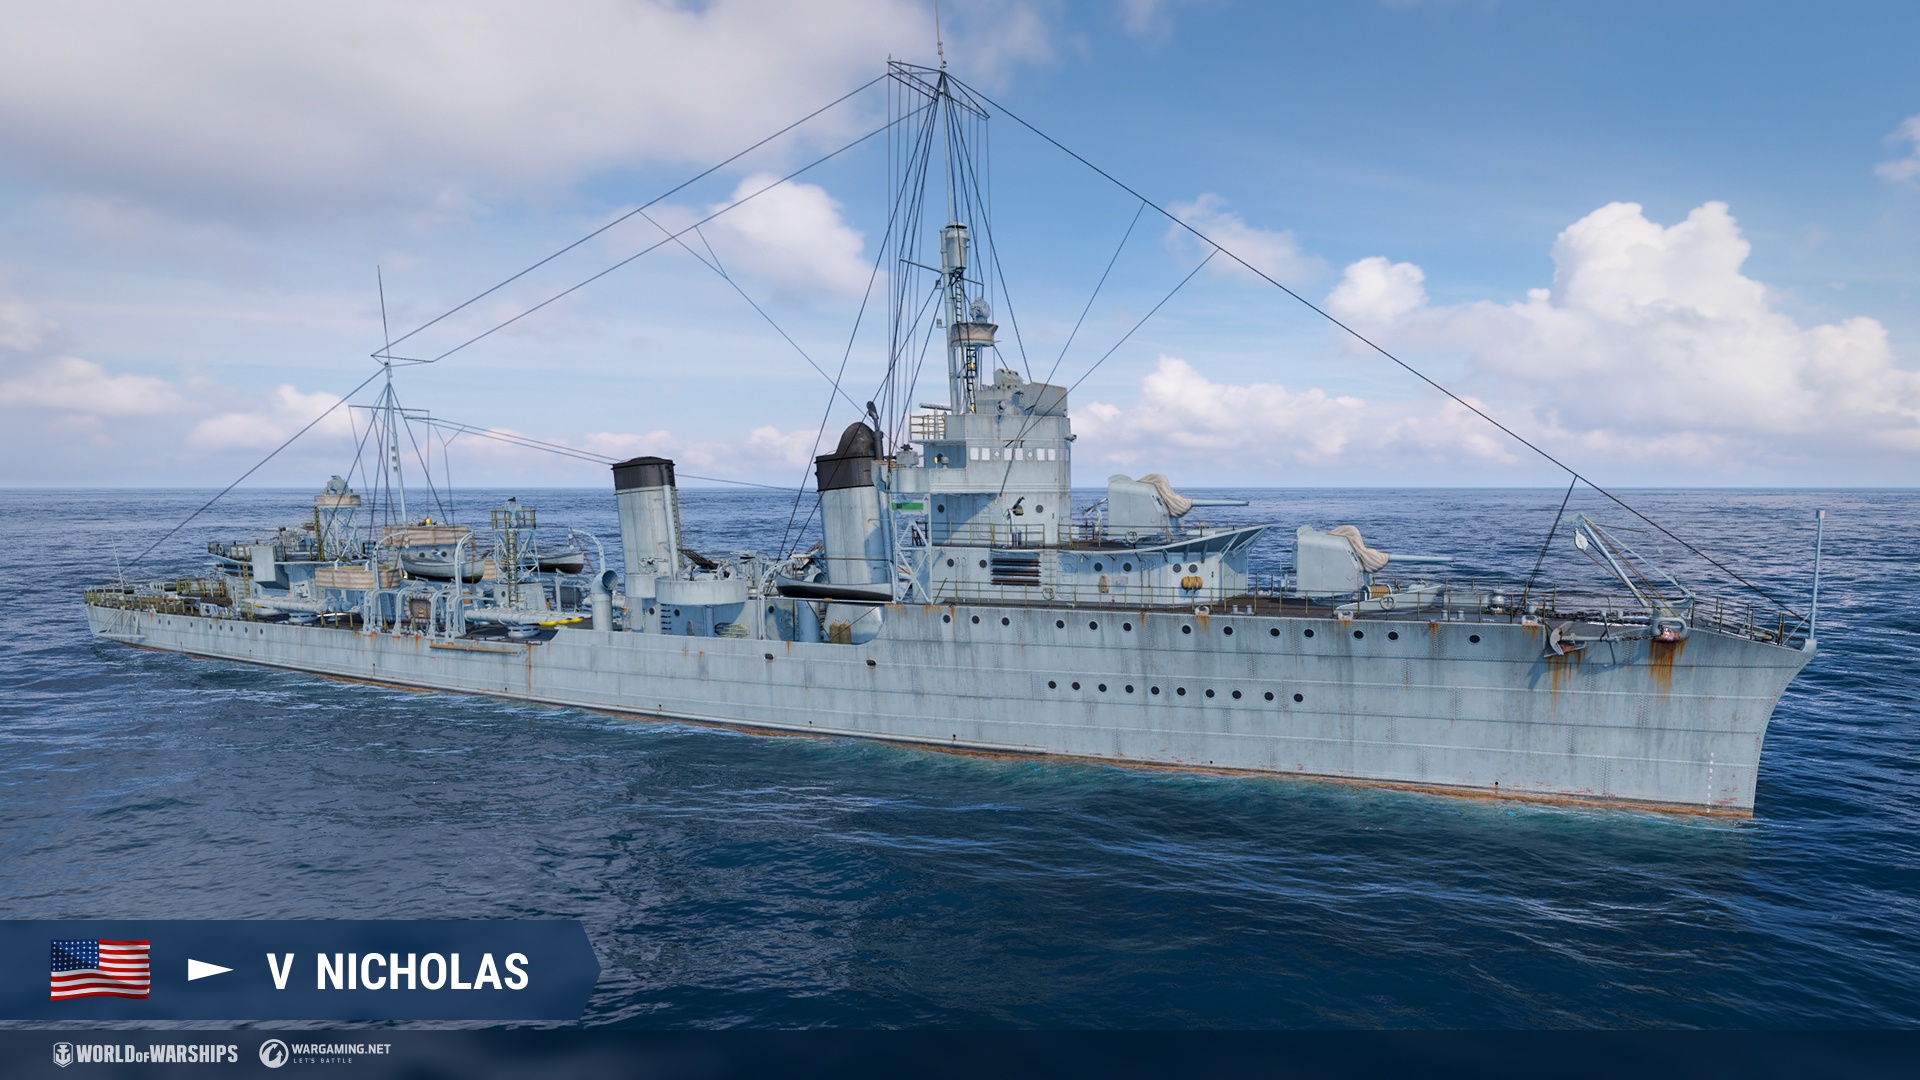 Whyat tier ship for operations world of warships - sigmanbvmb